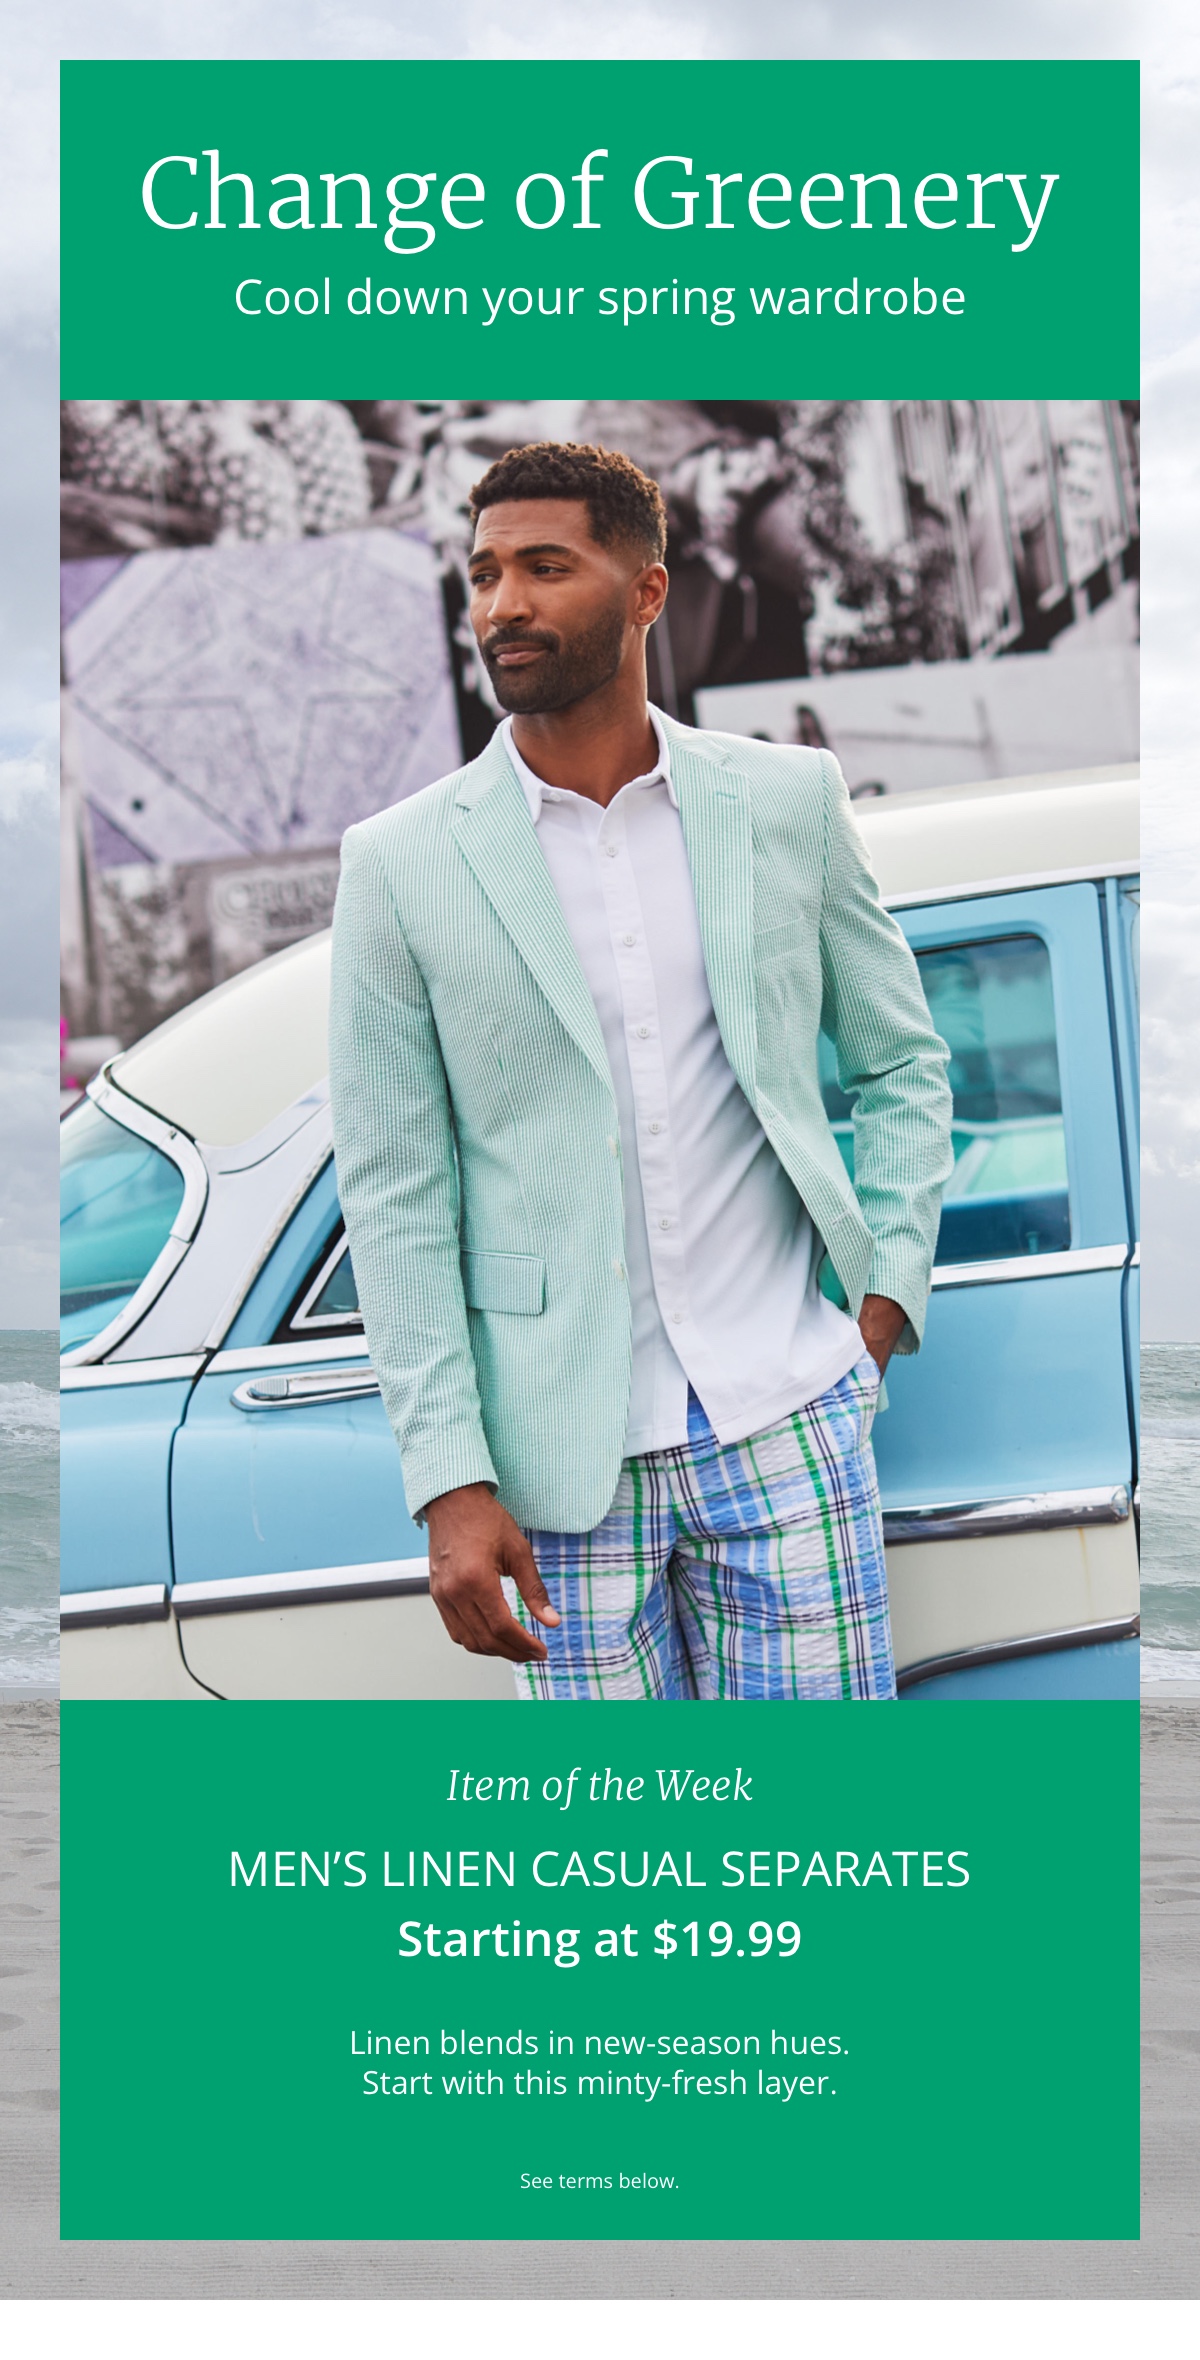 Change of Greenery. Cool down your spring wardrobe. Men s Item of the Week Linen Casual Separates Starting at $19.99. Linen blends in new-season hues. Start with this minty-fresh layer. See terms below.